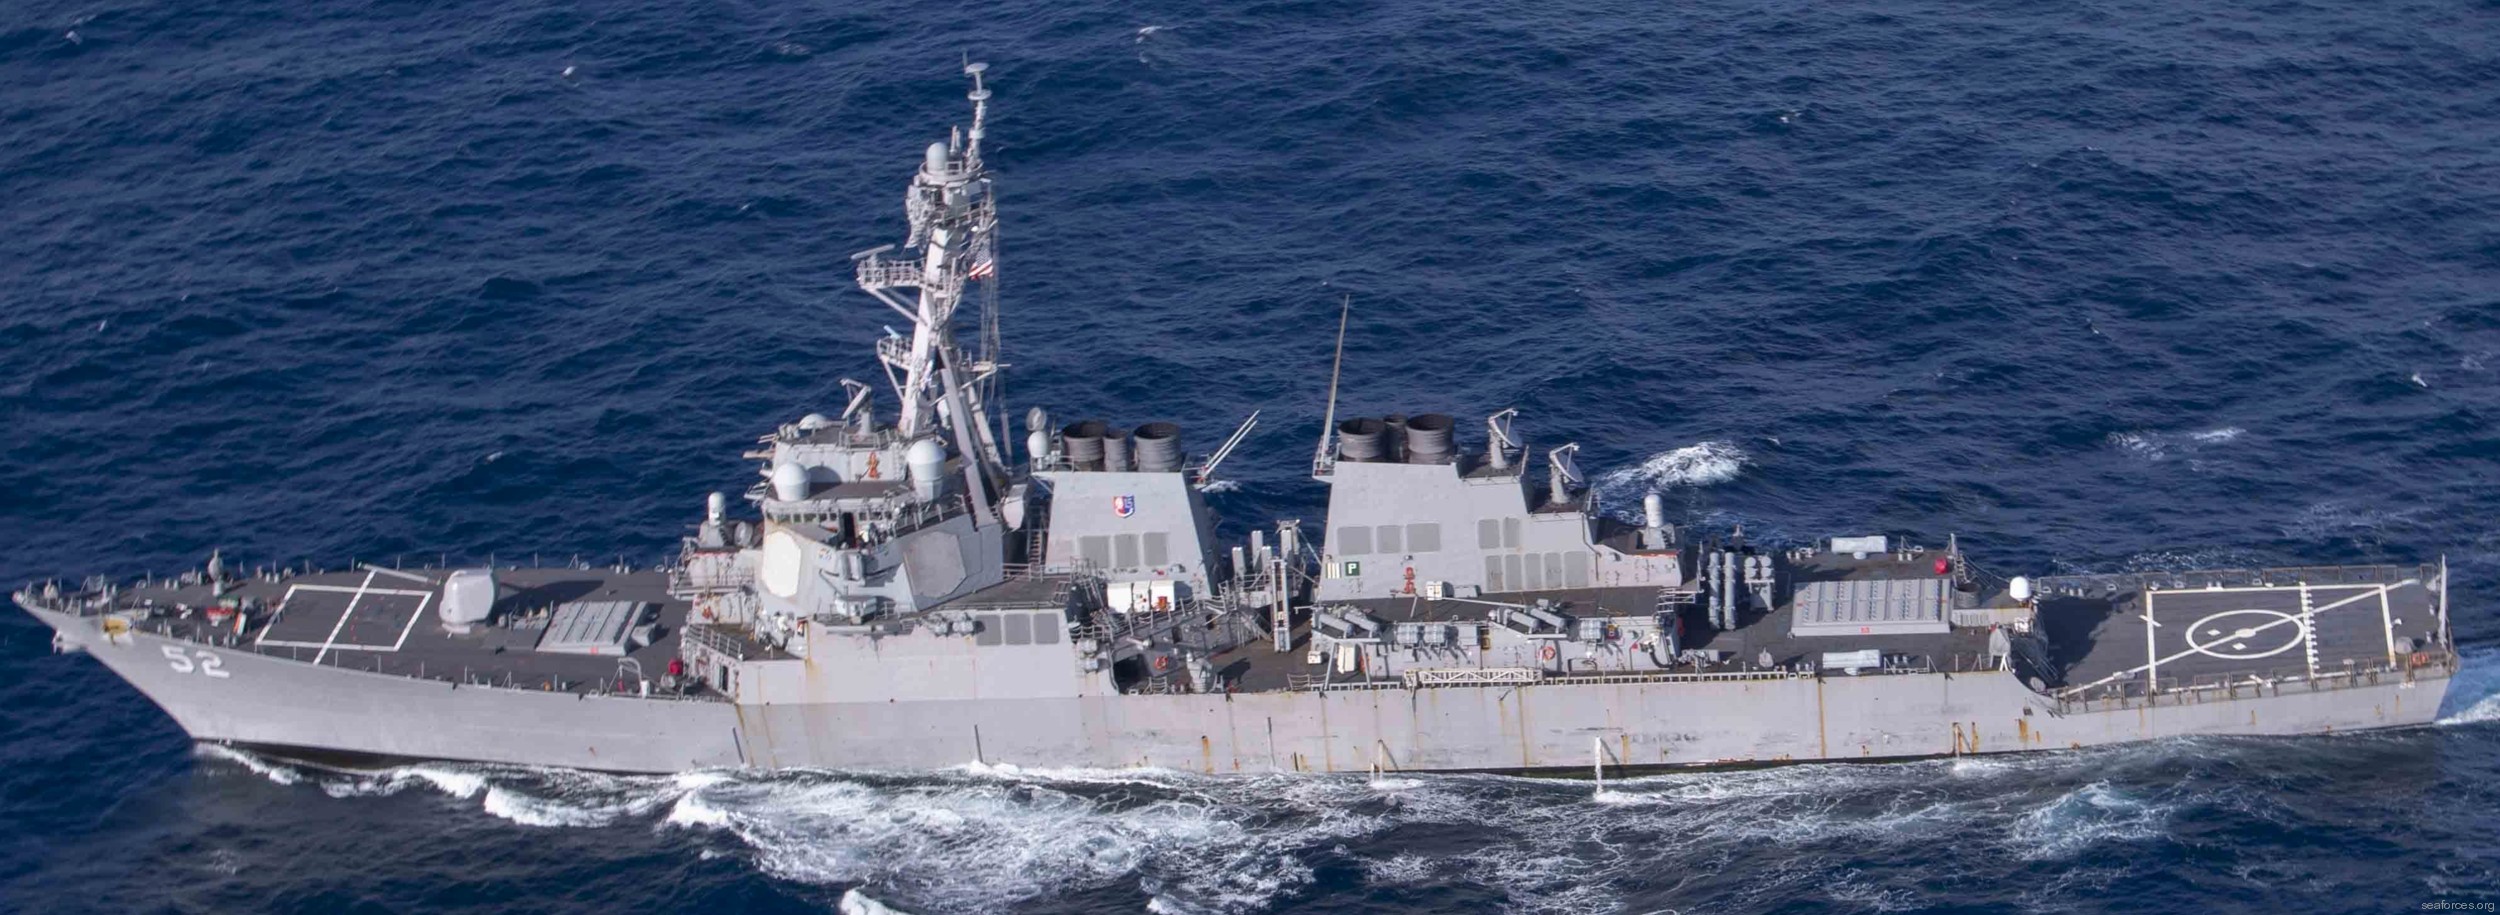 ddg-52 uss barry arleigh burke class guided missile destroyer us navy 103 east china sea